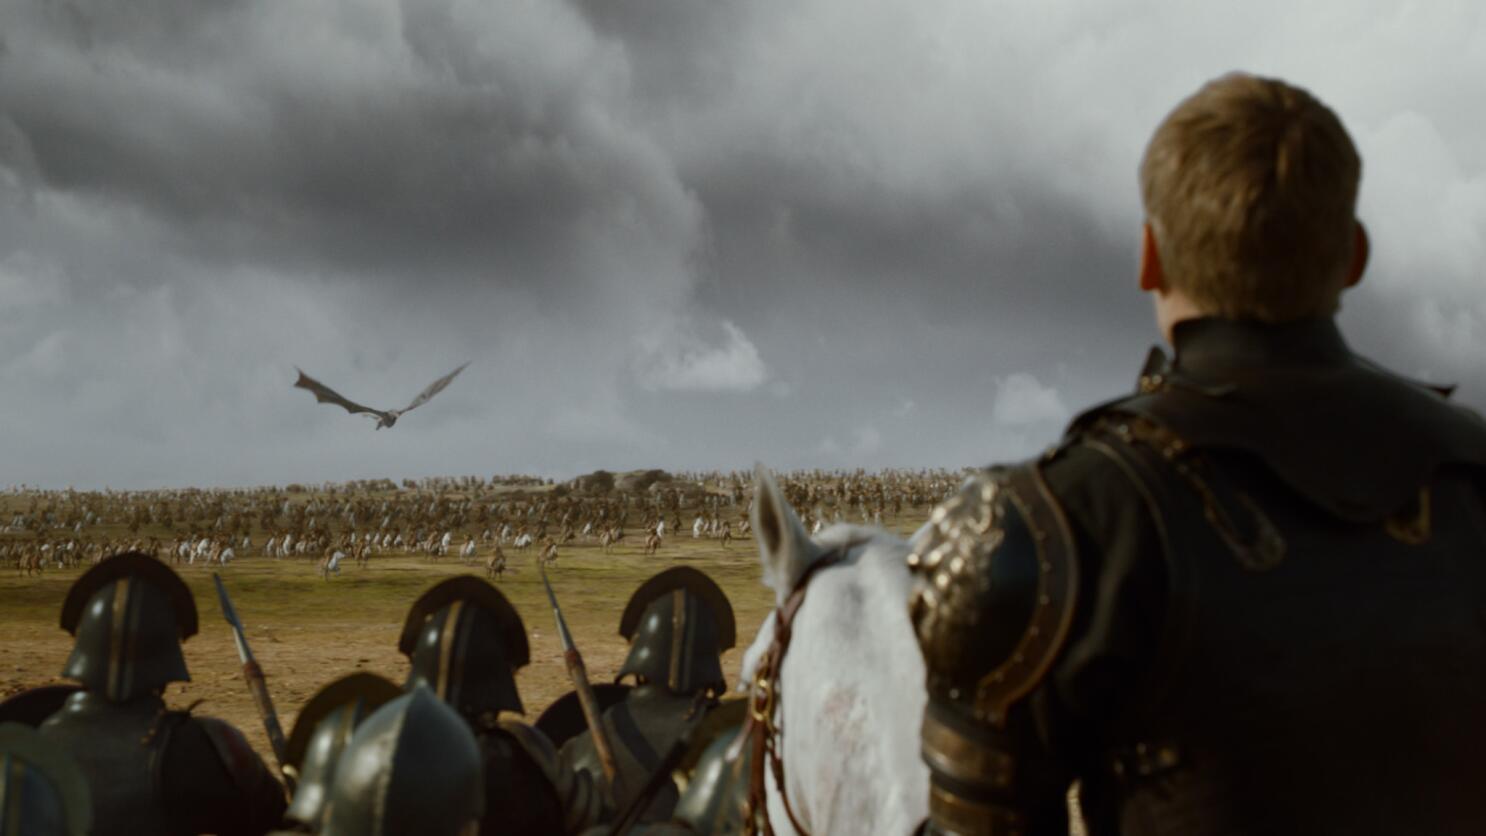 Game of Thrones' Surprise: Yes, Mets Pitcher Noah Syndergaard Threw Spear  for Lannister Army